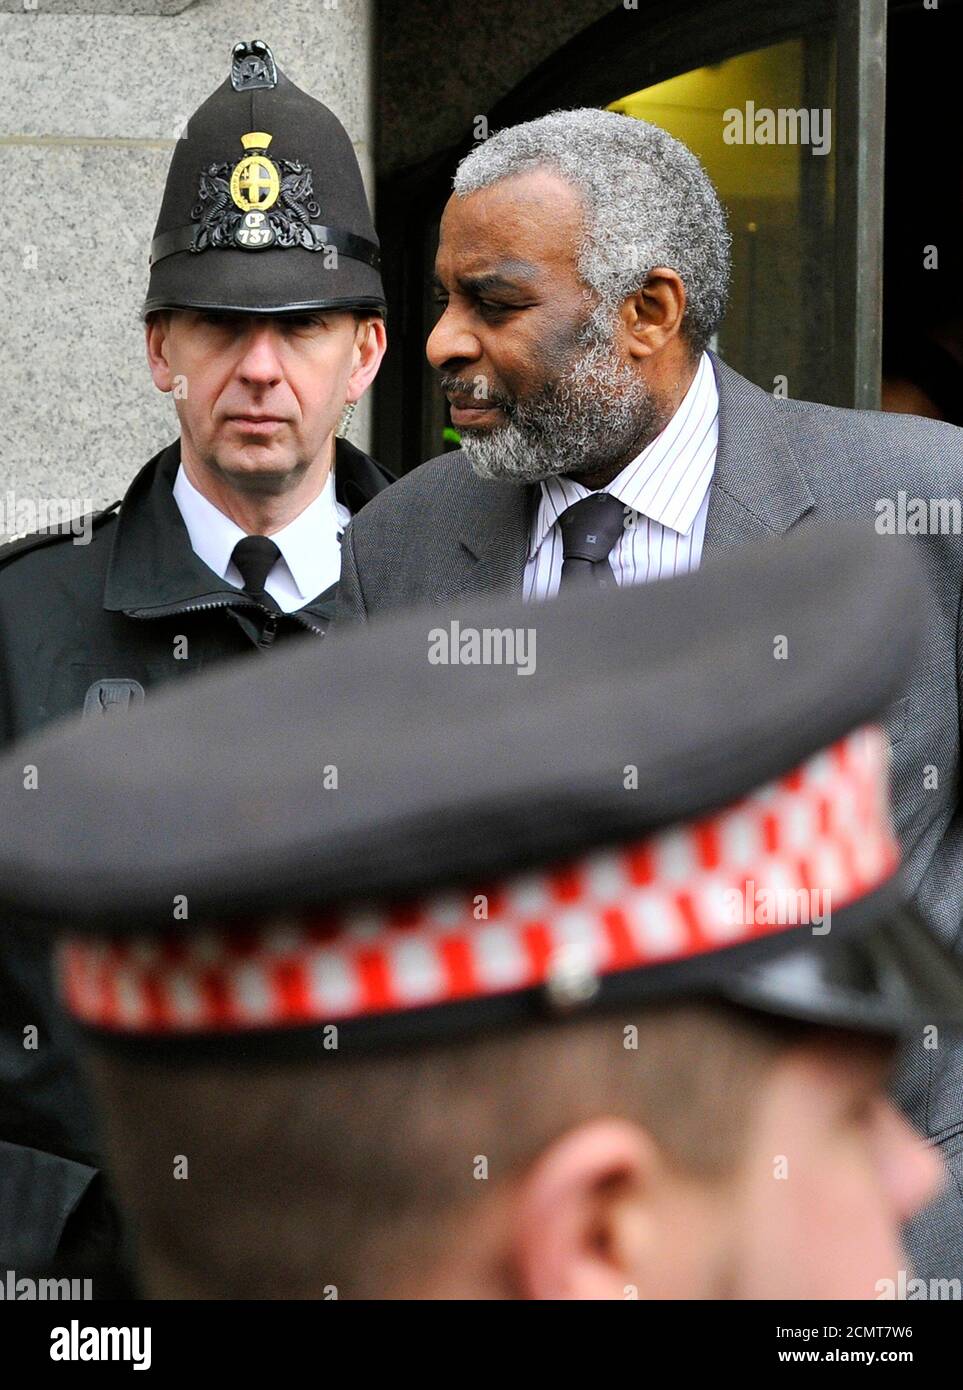 Neville Lawrence, father of murdered teenager Stephen Lawrence, emerges to address members of the media after Gary Dobson and David Norris were sentenced for his murder at the Old Bailey, the Central Criminal Court in London January 4, 2012. Two men who took part in the murder of black teenager Stephen Lawrence in 1993 -- a landmark case which exposed what an inquiry called the 'institutional racism' of London's police force -- were given life sentences on Wednesday.  REUTERS/Toby Melville  (BRITAIN - Tags: CRIME LAW SOCIETY) Stock Photo